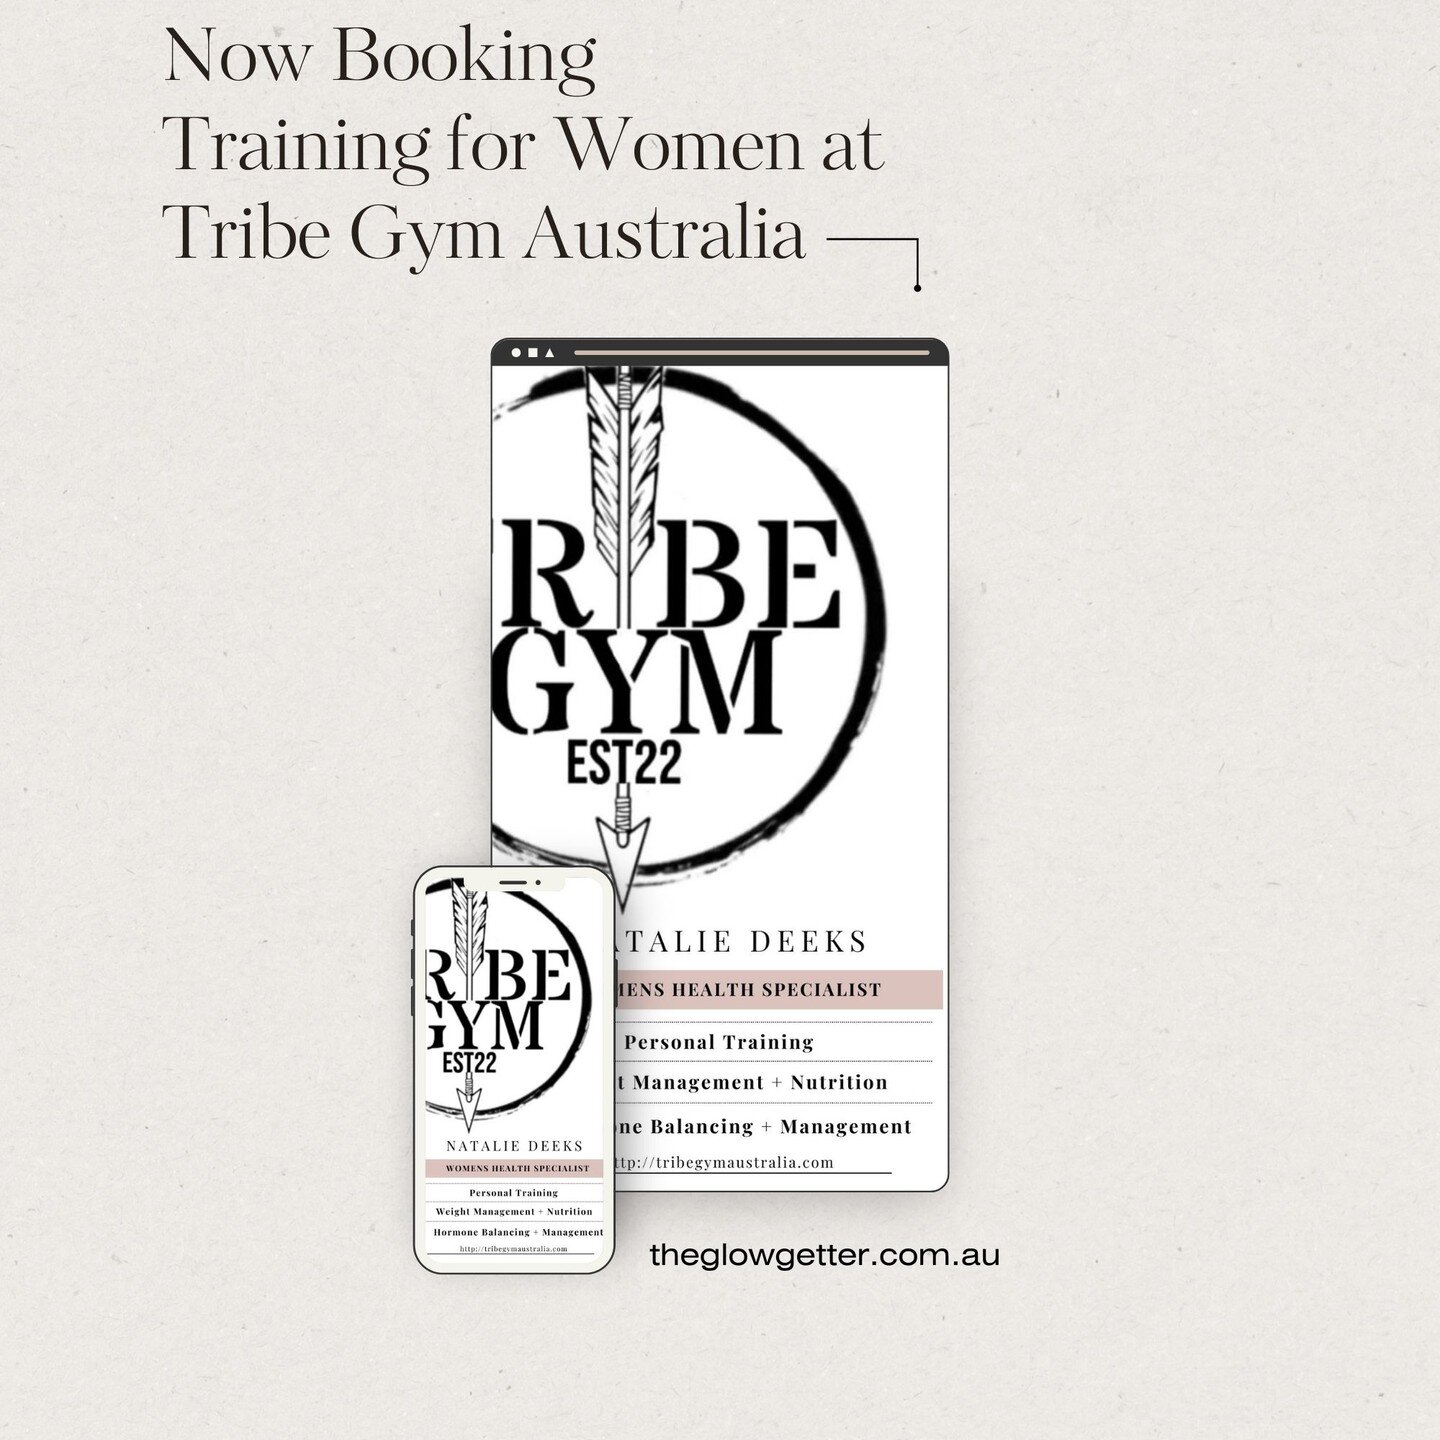 Offering bespoke fitness programs to help you achieve your goals. Training now available @tribe.gym - a boutique gym where you are part of a tribe, not part of the crowd.

Your program combines physical and mental training, with nutrition and naturop